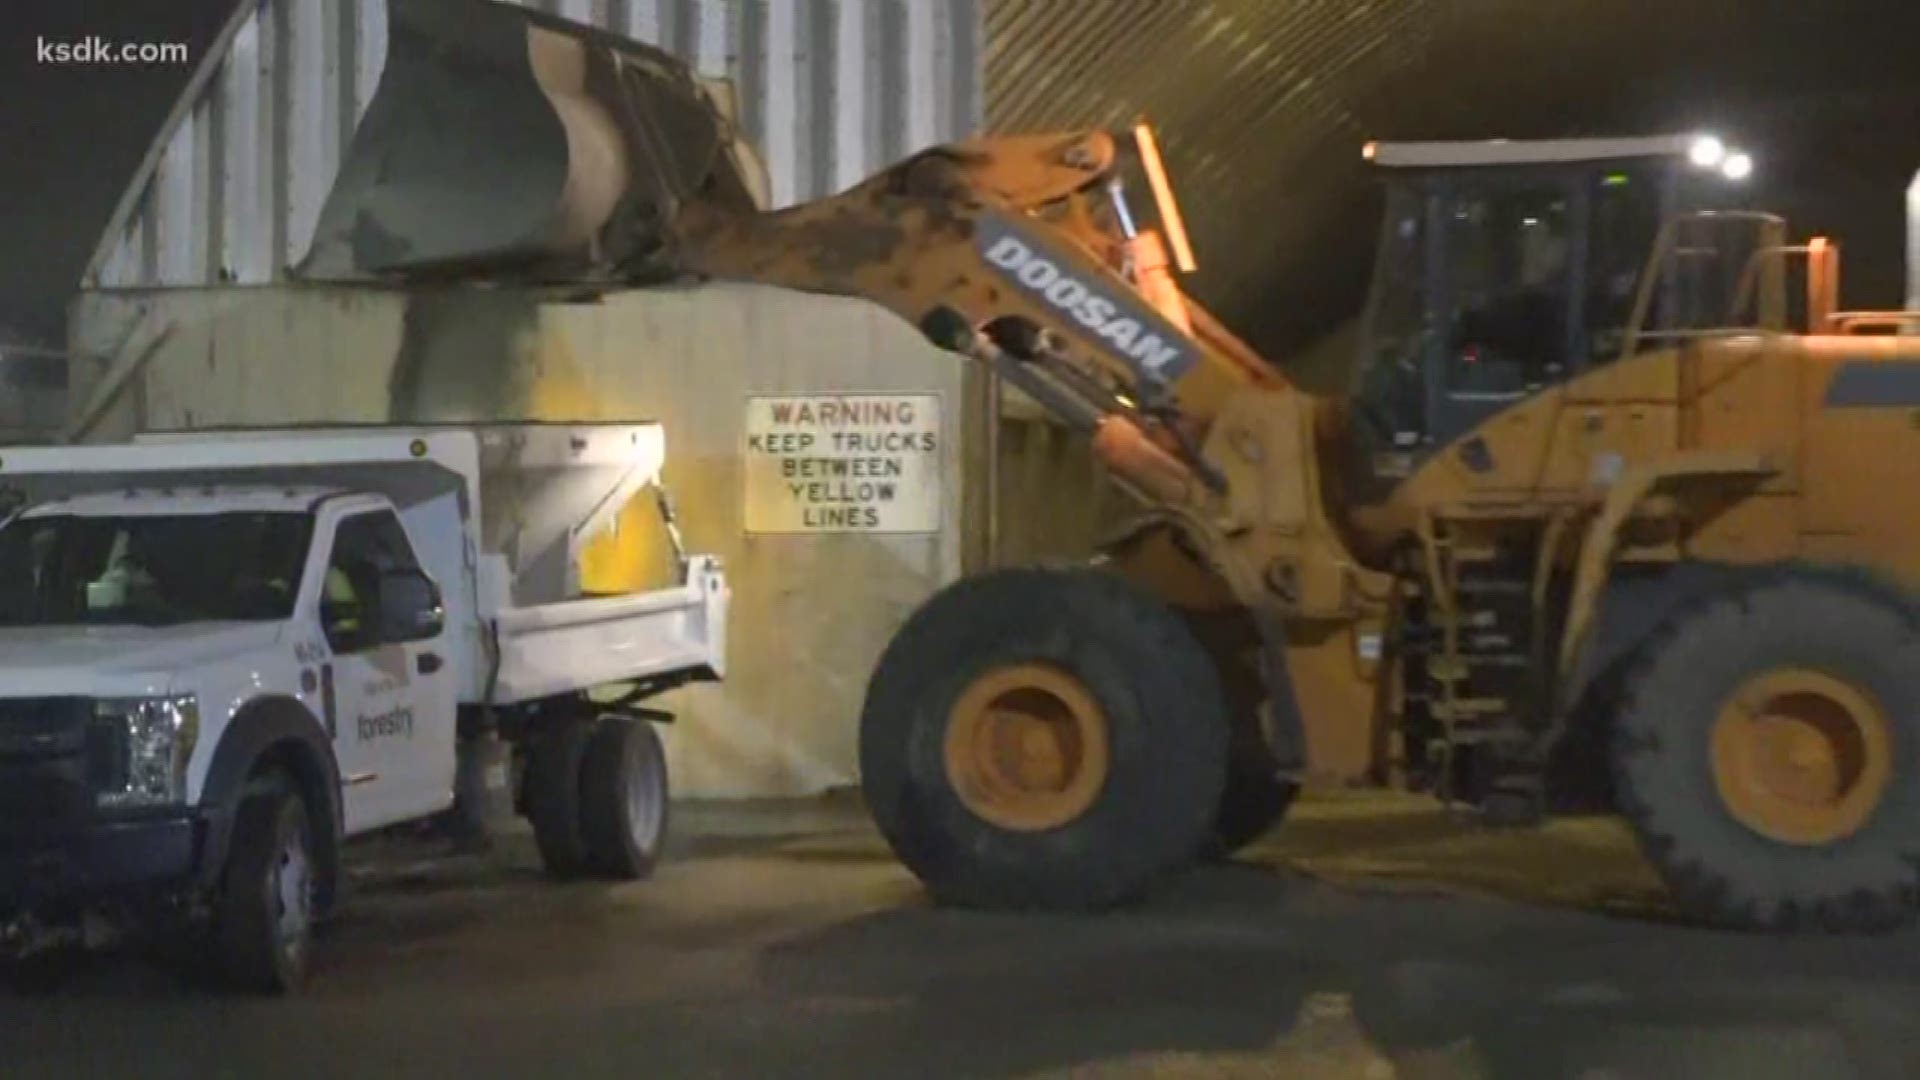 Trucks are spreading salt all over St. Louis roads in preparation for incoming snow and sleet